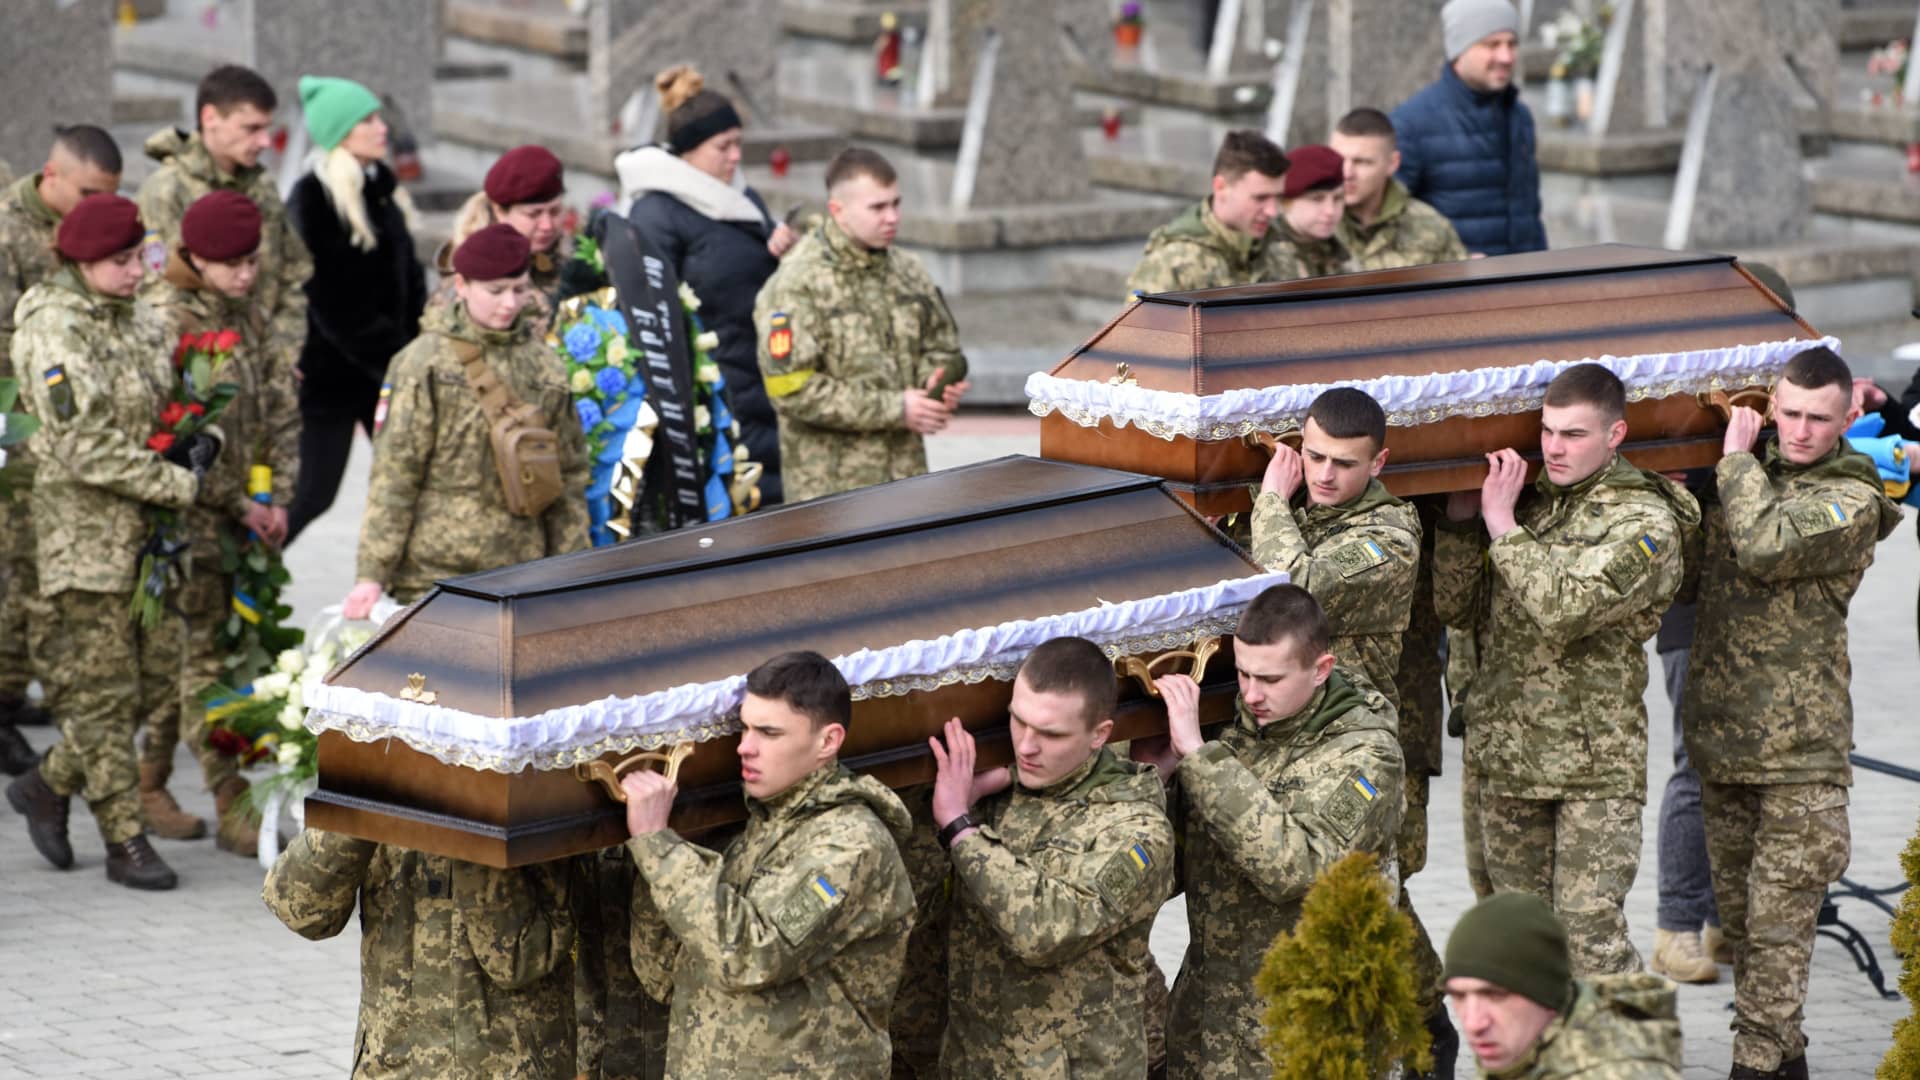 Servicemen carry coffins during funerals of Dmytro Kotenko, Vasyl Vyshyvany and Kyrylo Moroz, Ukrainian servicemen killed during Russia's invasion of Ukraine, at Lychakiv cemetery in the western Ukrainian city of Lviv on March 9, 2022.